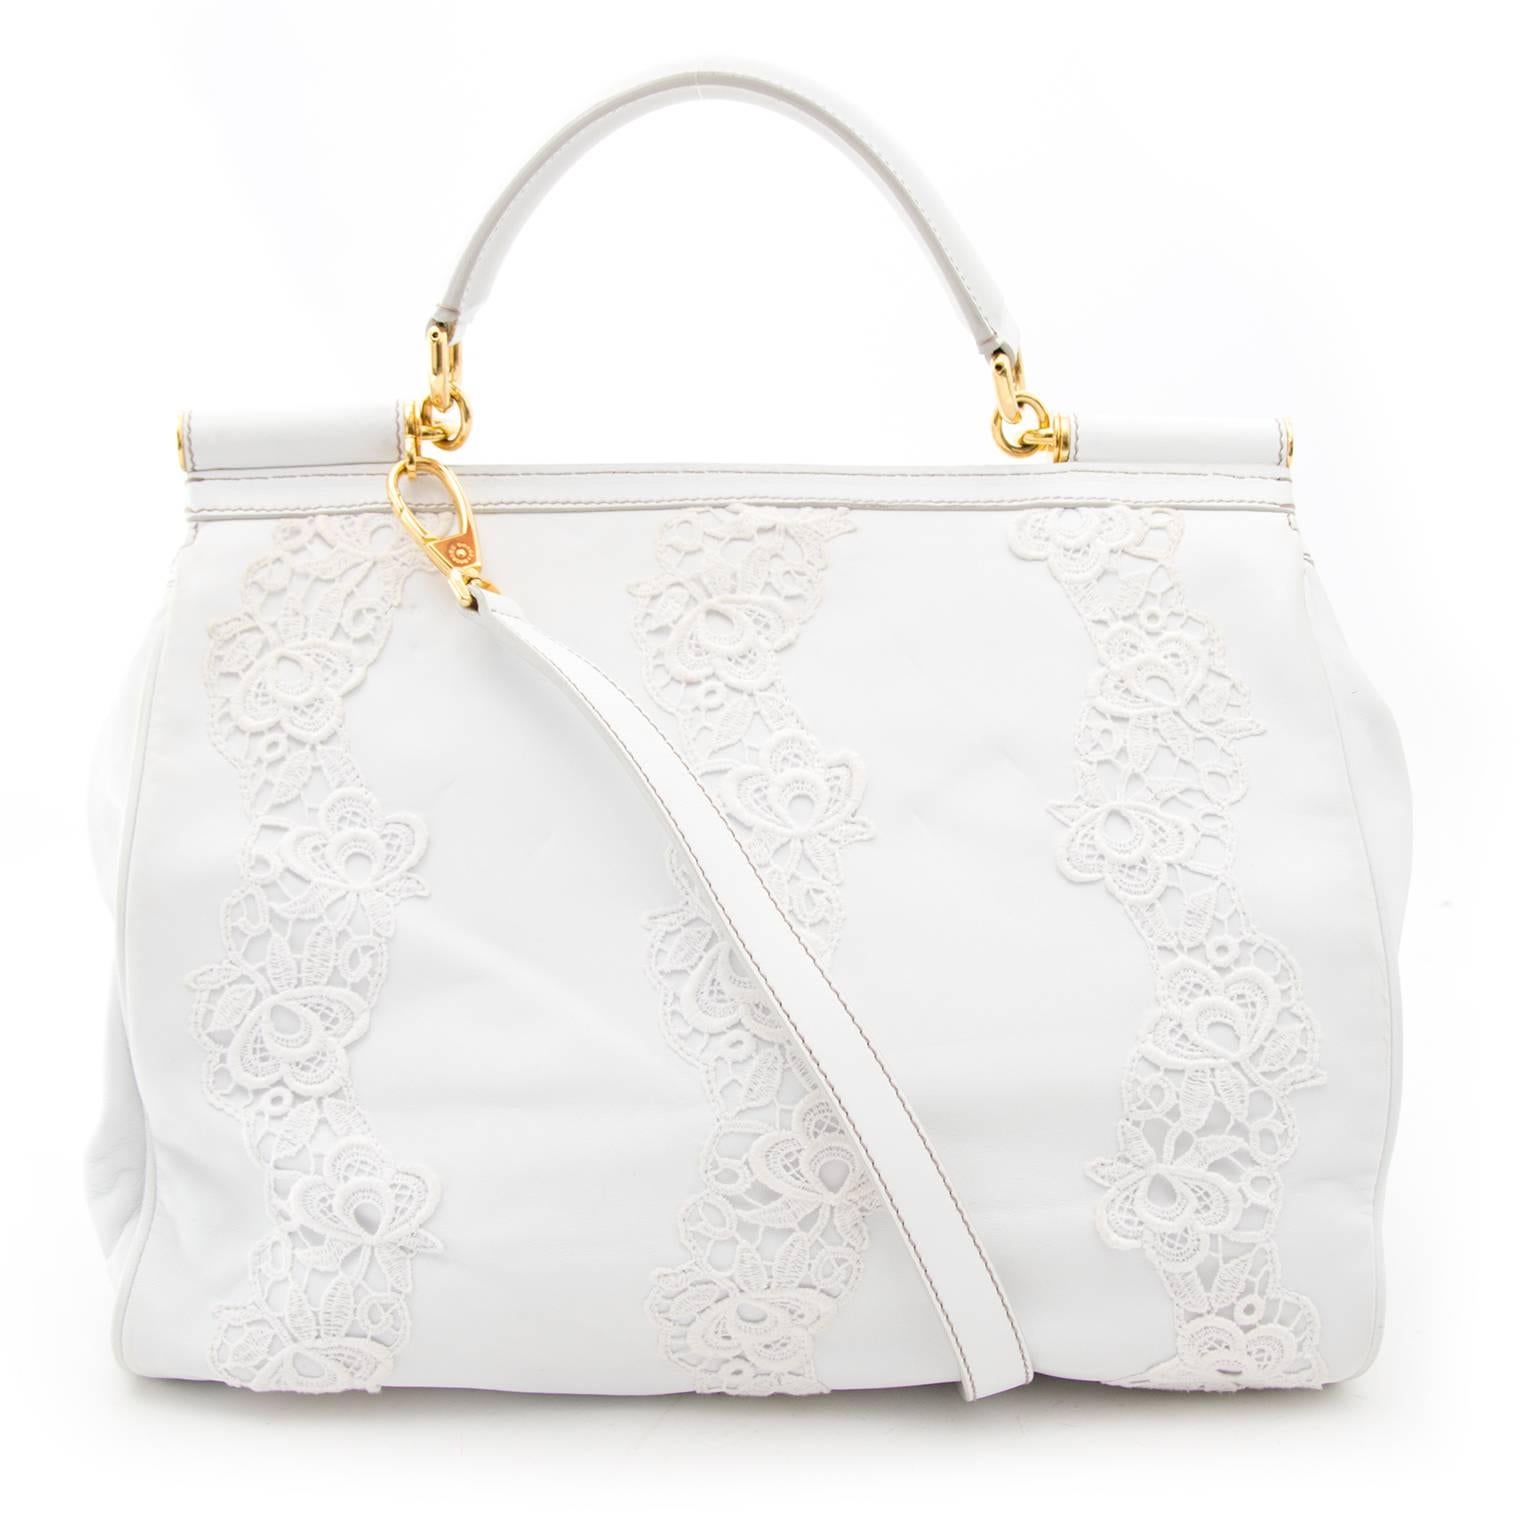 Dolce & Gabbana created a perfect bag to match your summer looks wtih this gorgeous white piece.
The white leather is combined with lace parts and finished with shiny gold-tone details.
Open this beauty with the push-buttons beneath the front flap